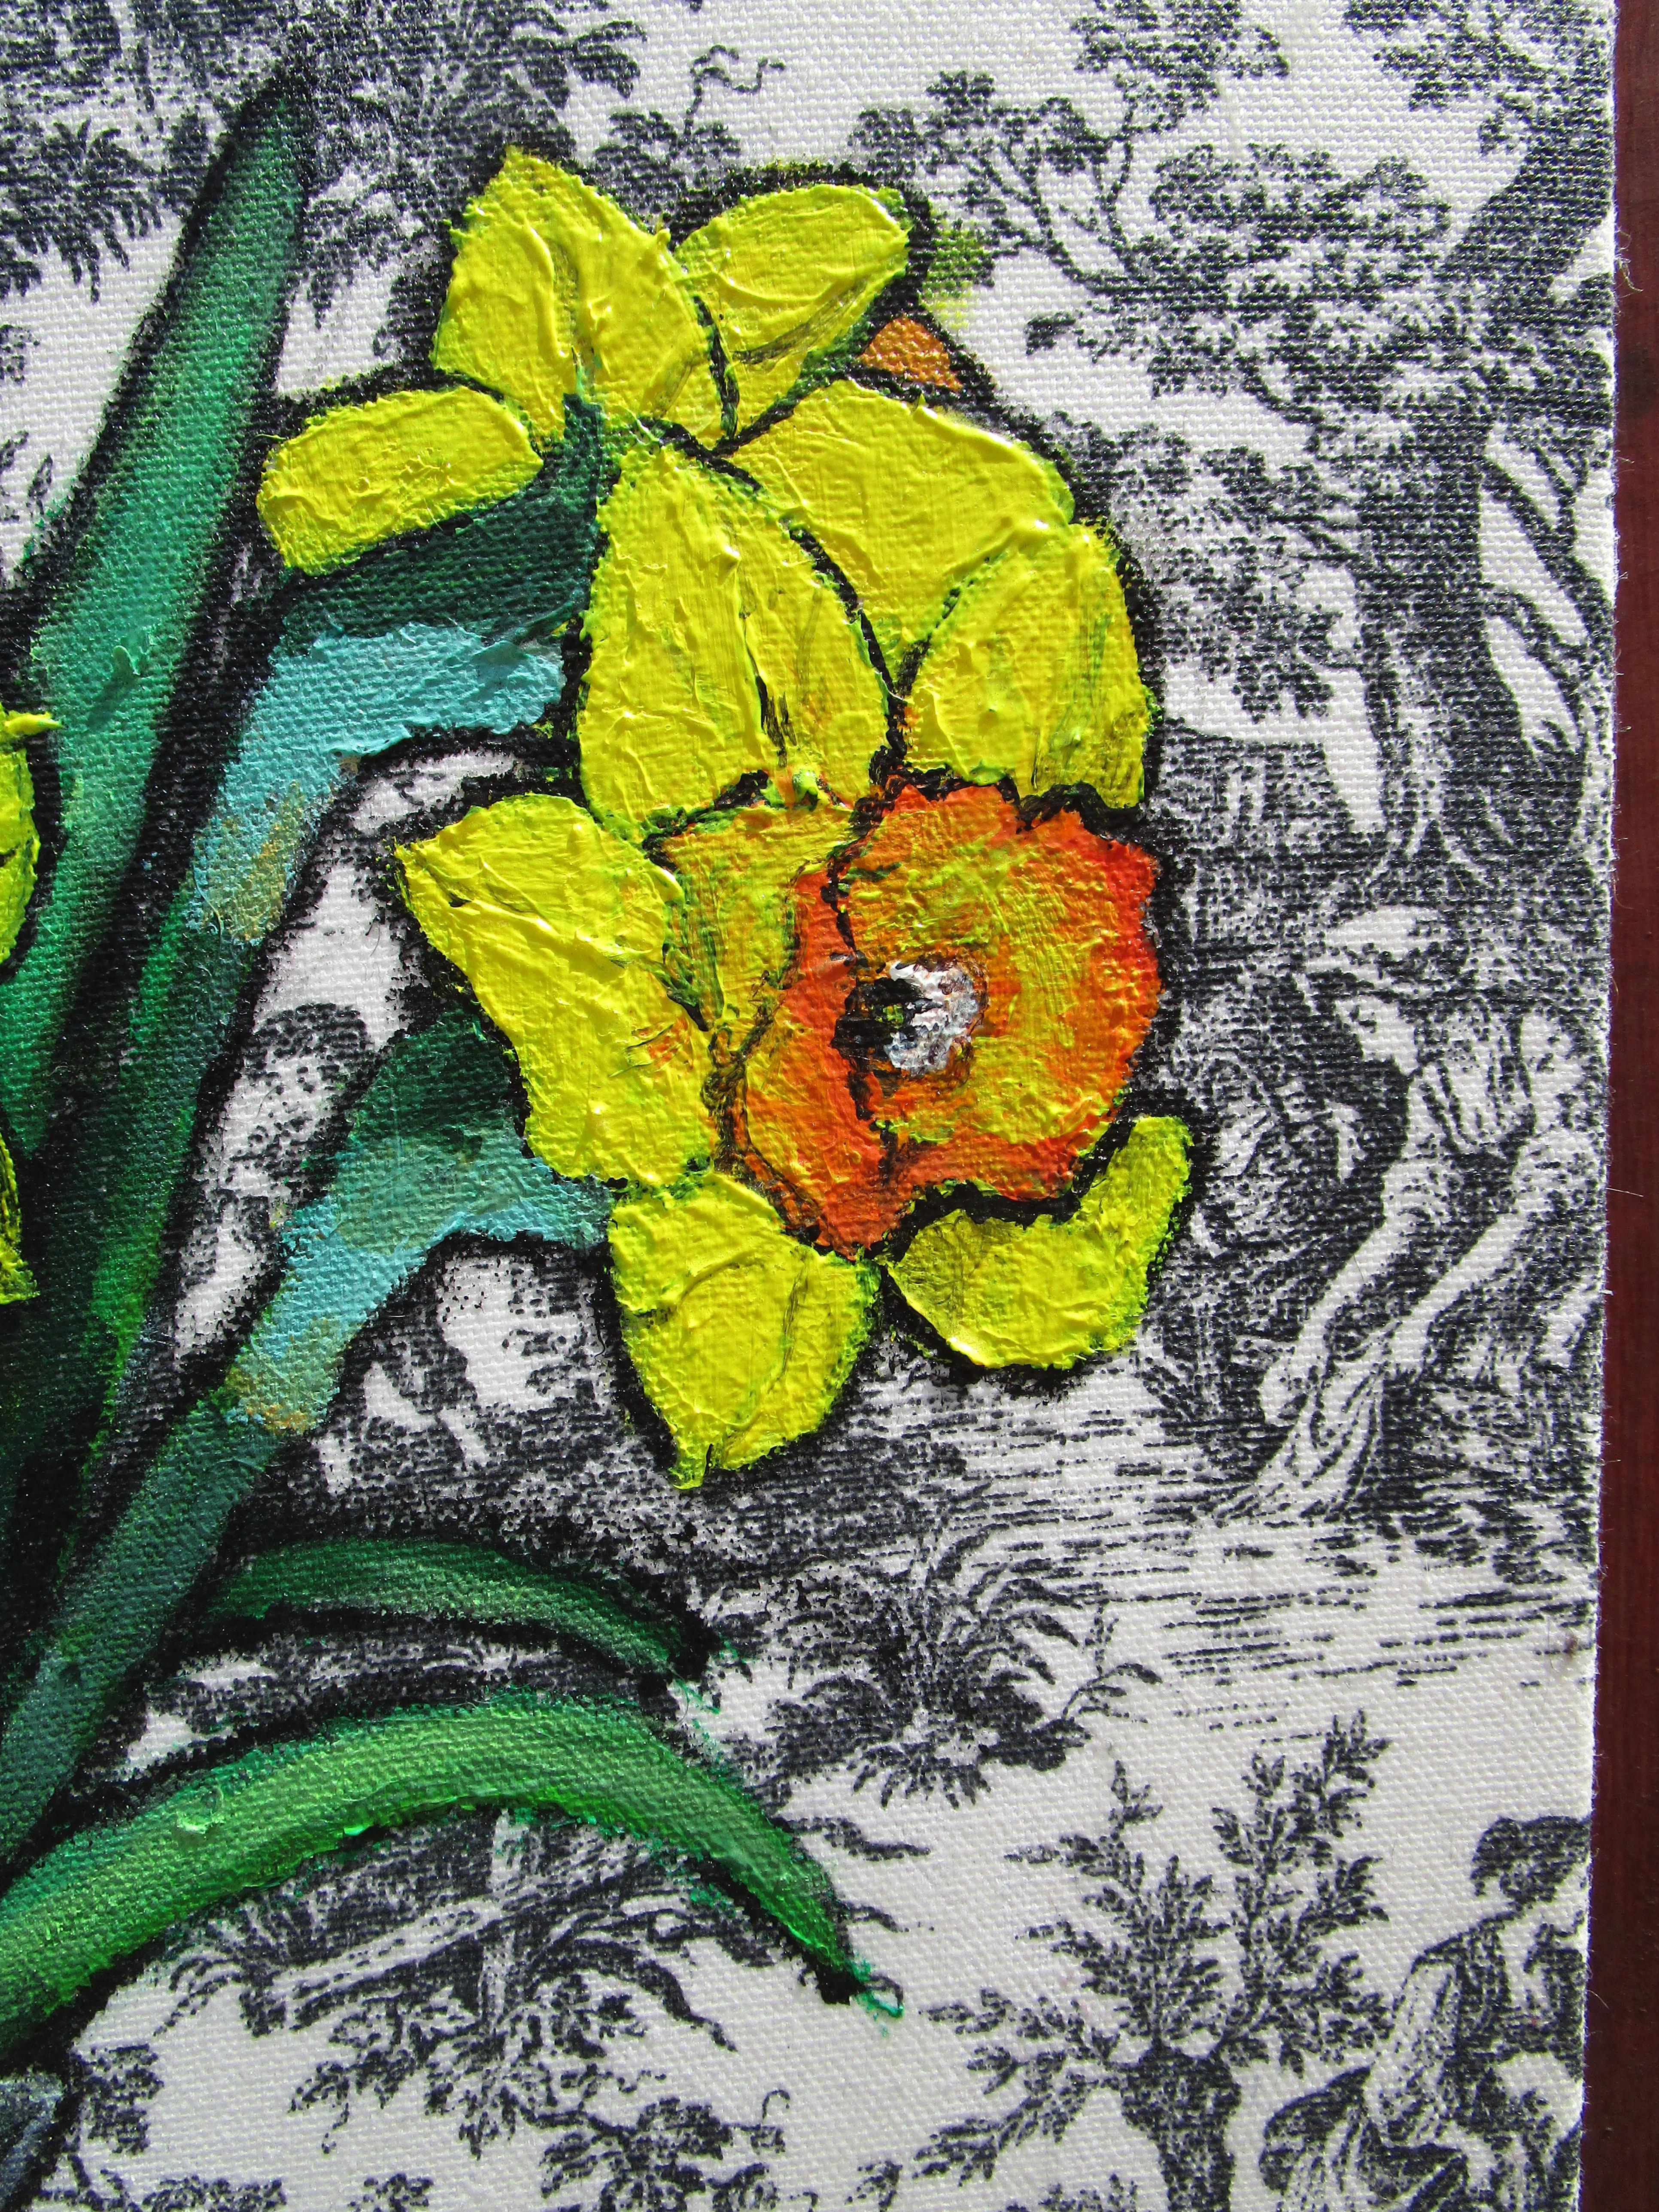 <p>Artist Comments<br />The artwork is acrylic paint on a canvas that has been wrapped with a printed cotton fabric (toile). Daffodils was one of my earliest attempts in this style.</p><br /><p>About the Artist<br />Greg’s unique take on floral